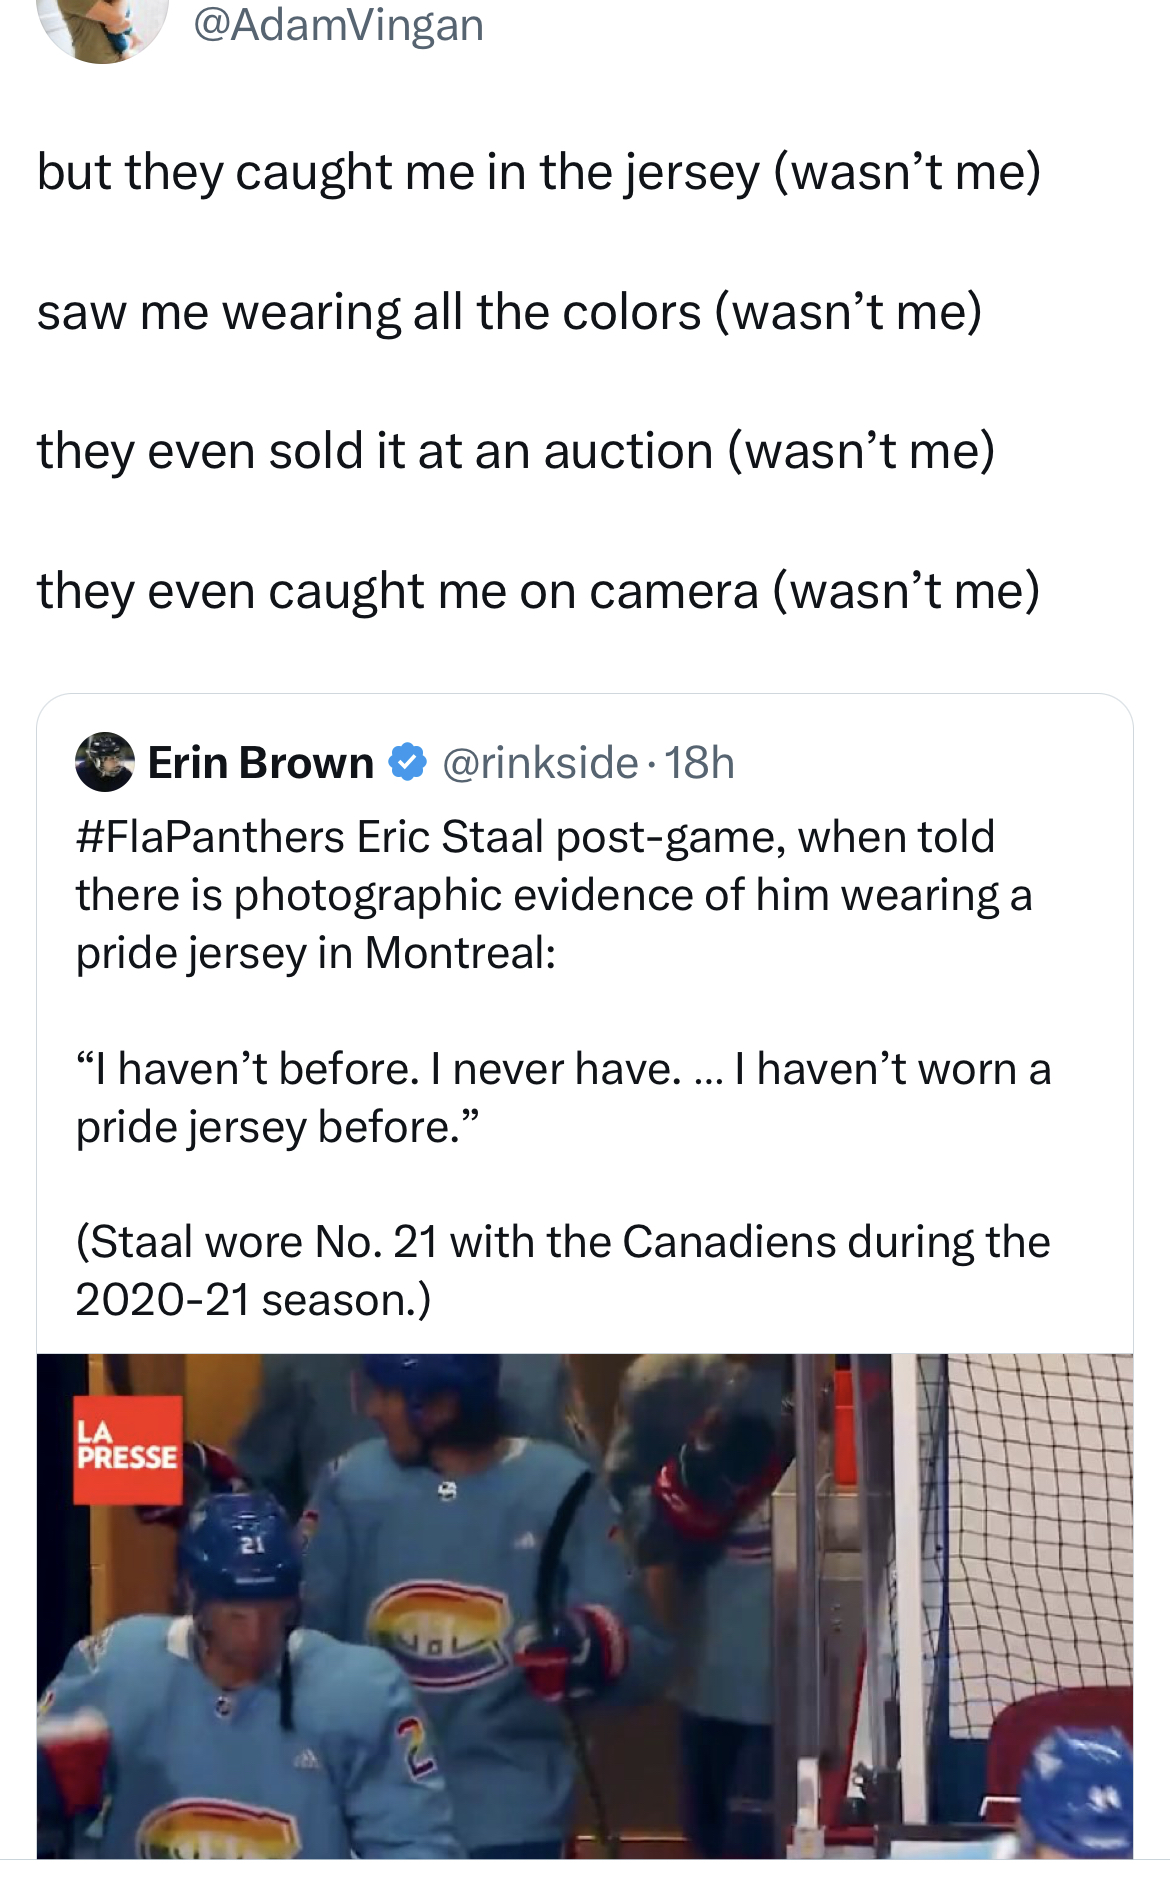 Savage and Unhinged tweets material - but they caught me in the jersey wasn't me saw me wearing all the colors wasn't me they even sold it at an auction wasn't me they even caught me on camera wasn't me Erin Brown 18h Eric Staal postgame, when told there 